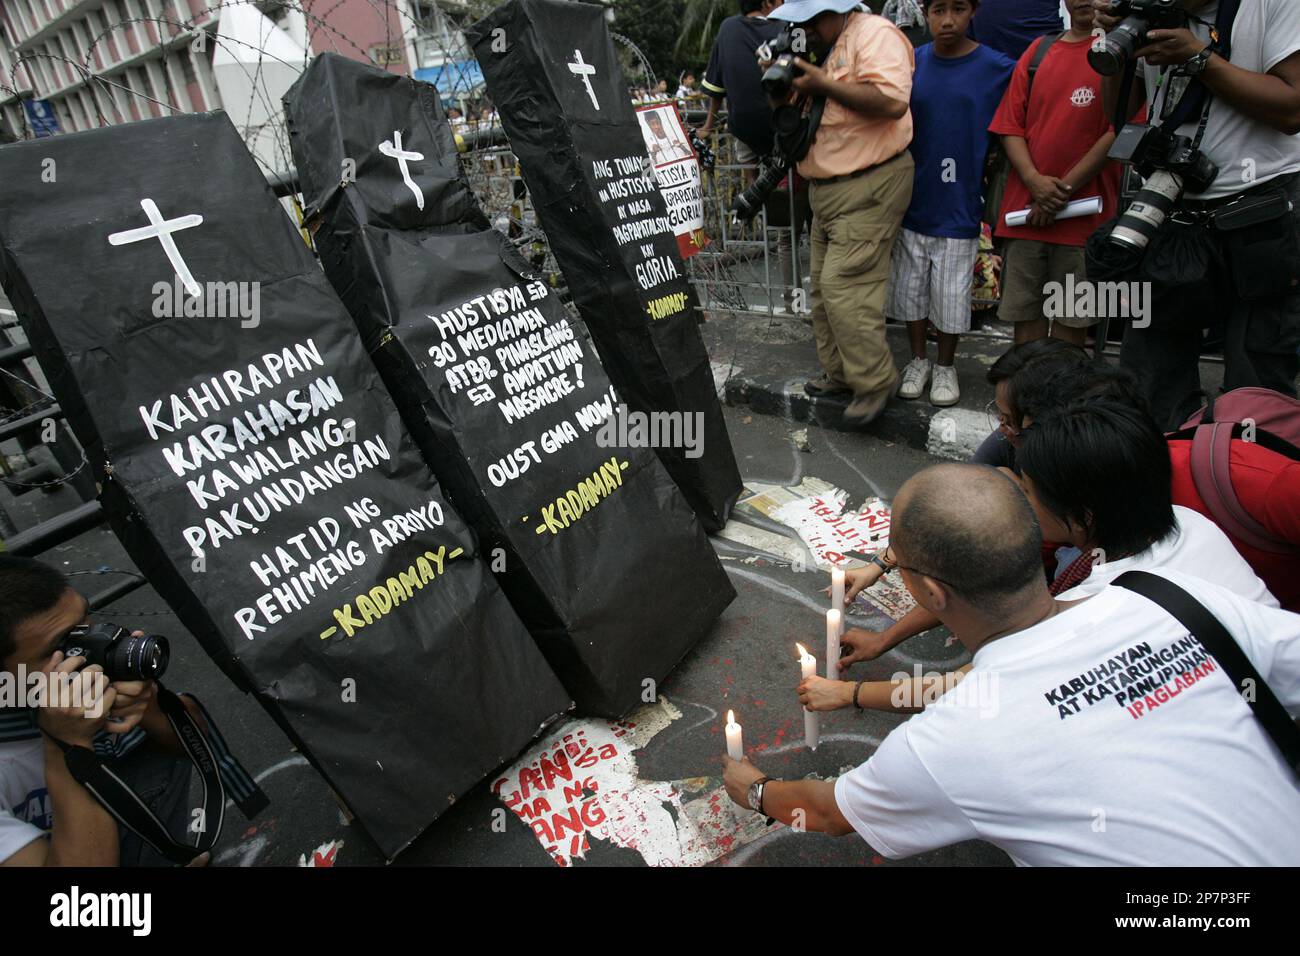 Filipino activists light candles in front of mock coffins which is painted with slogans denouncing injustice and violence under President Gloria Macapagal Arroyo and demanding justice for massacre victims during a rally near the Malacanang presidential palace in Manila, Philippines on Thursday Dec. 3, 2009. The group is condemning the Philippines' worst political massacre which killed 57 people, more than half of them journalist. The powerful Ampatuan clan, which is an ally of Philippine President Gloria Macapagal Arroyo, is being blamed for the mass killings. (AP Photo/Aaron Favila) Stock Photo